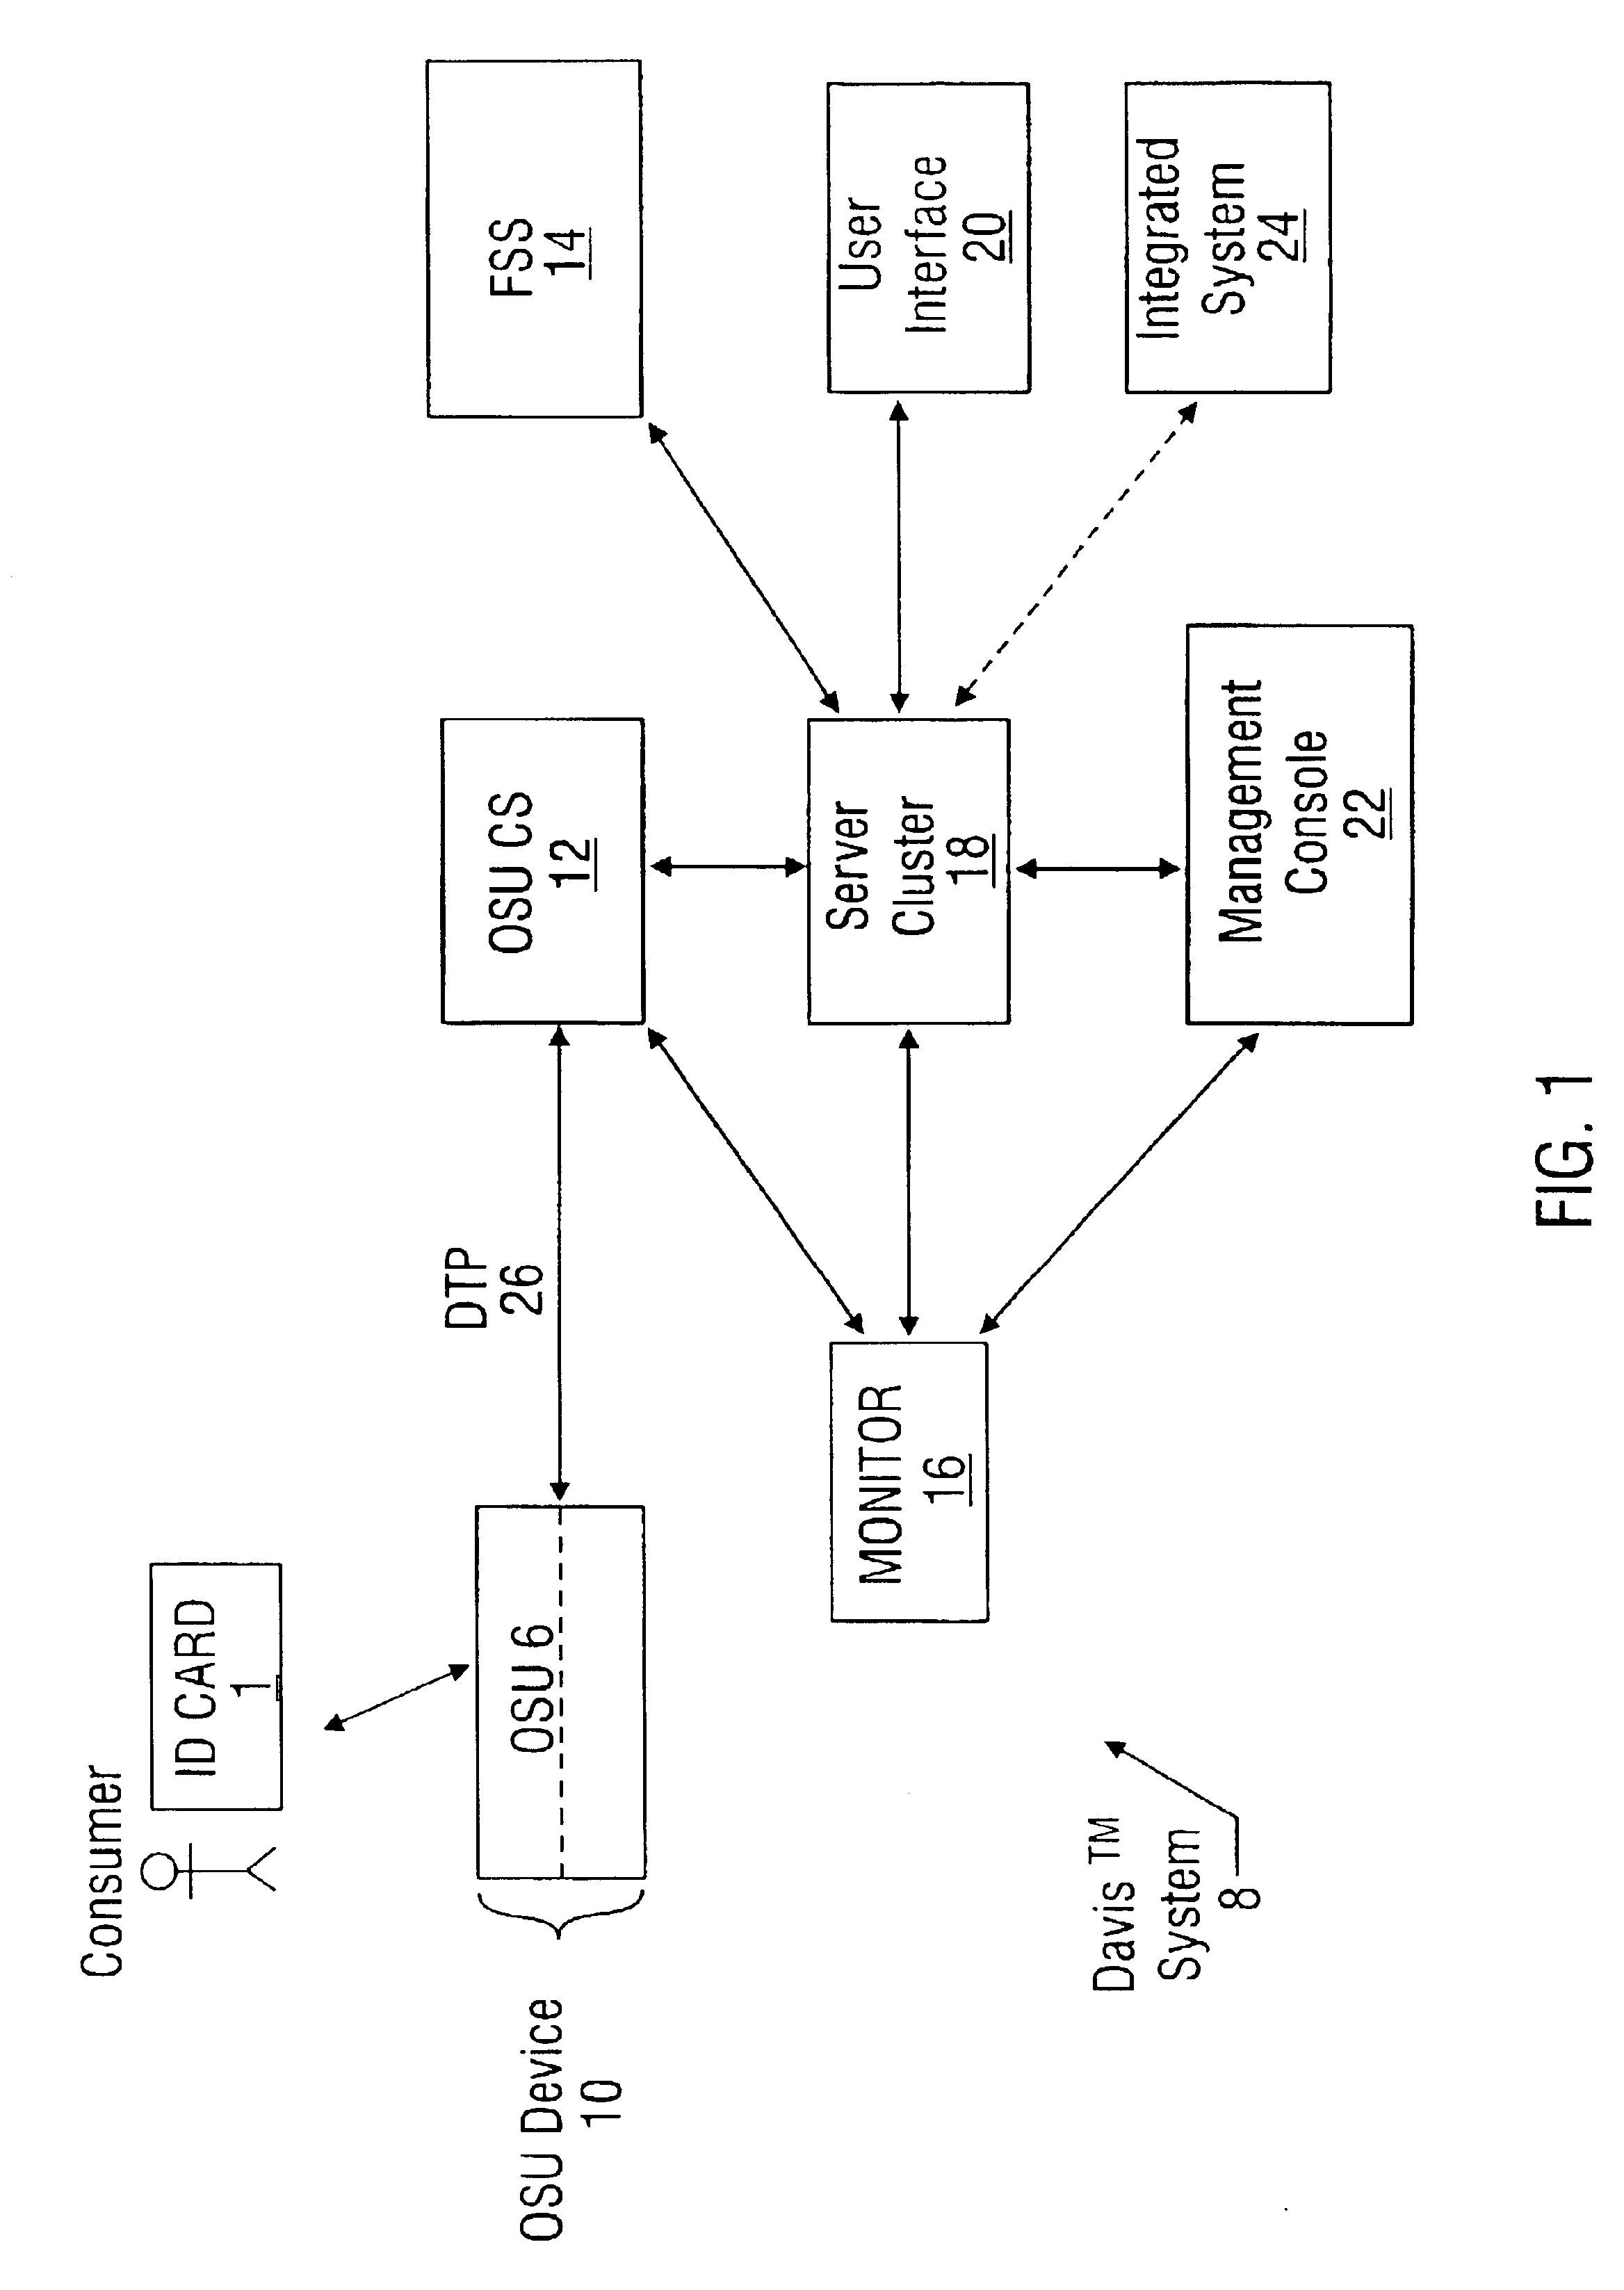 System for vending products and services using an identification card and associated methods